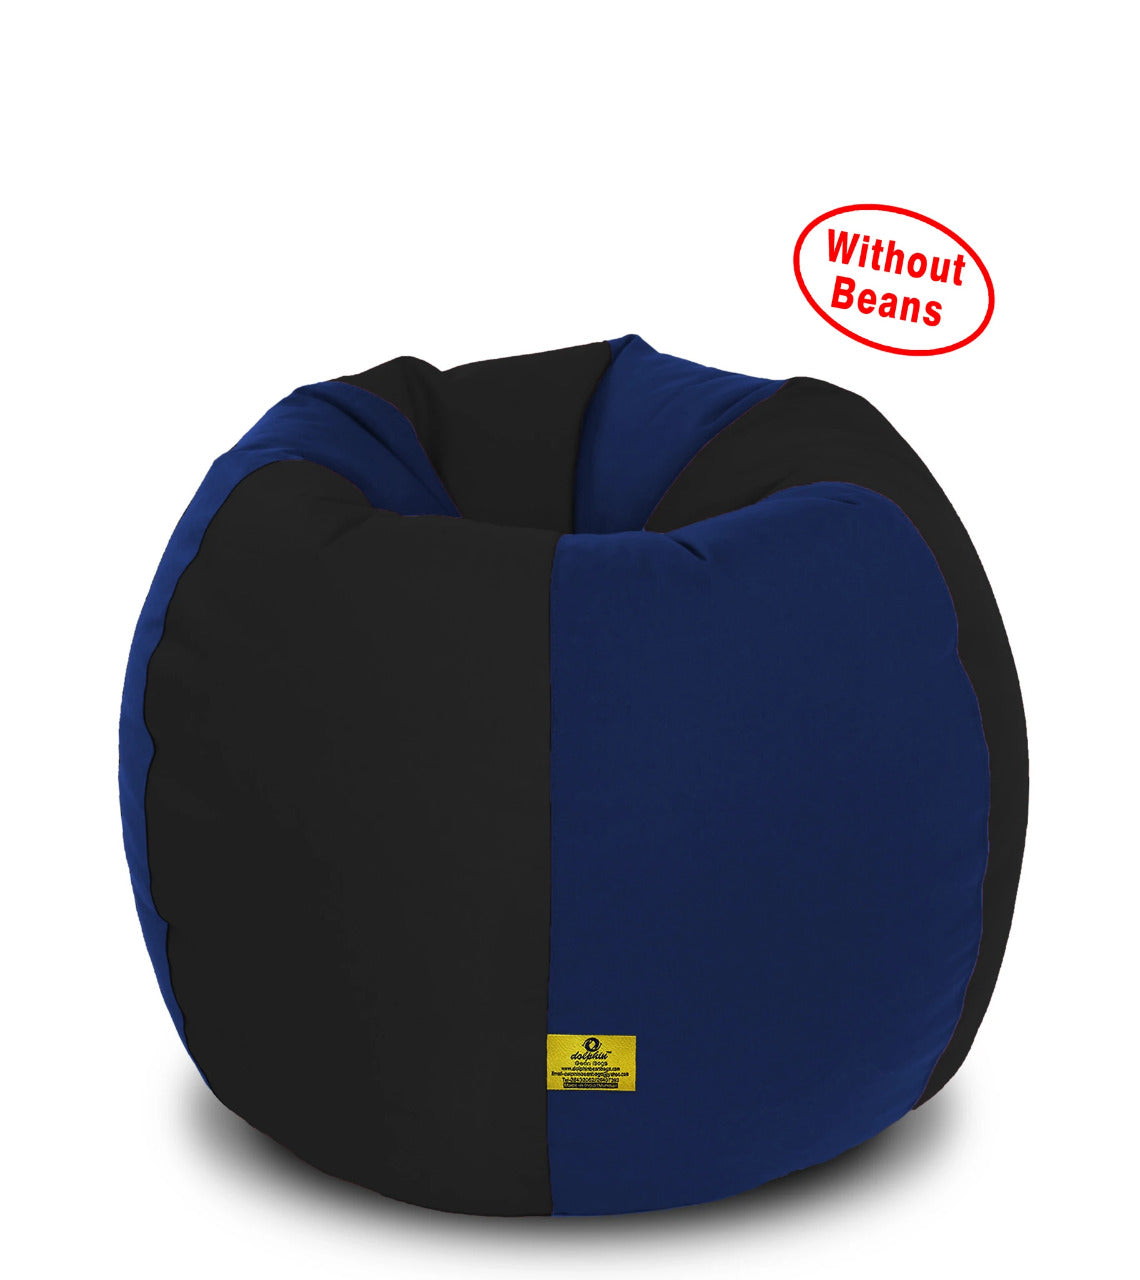 Bean Bag: XL Black/N.Blue Fabric Cover (Without Beans)